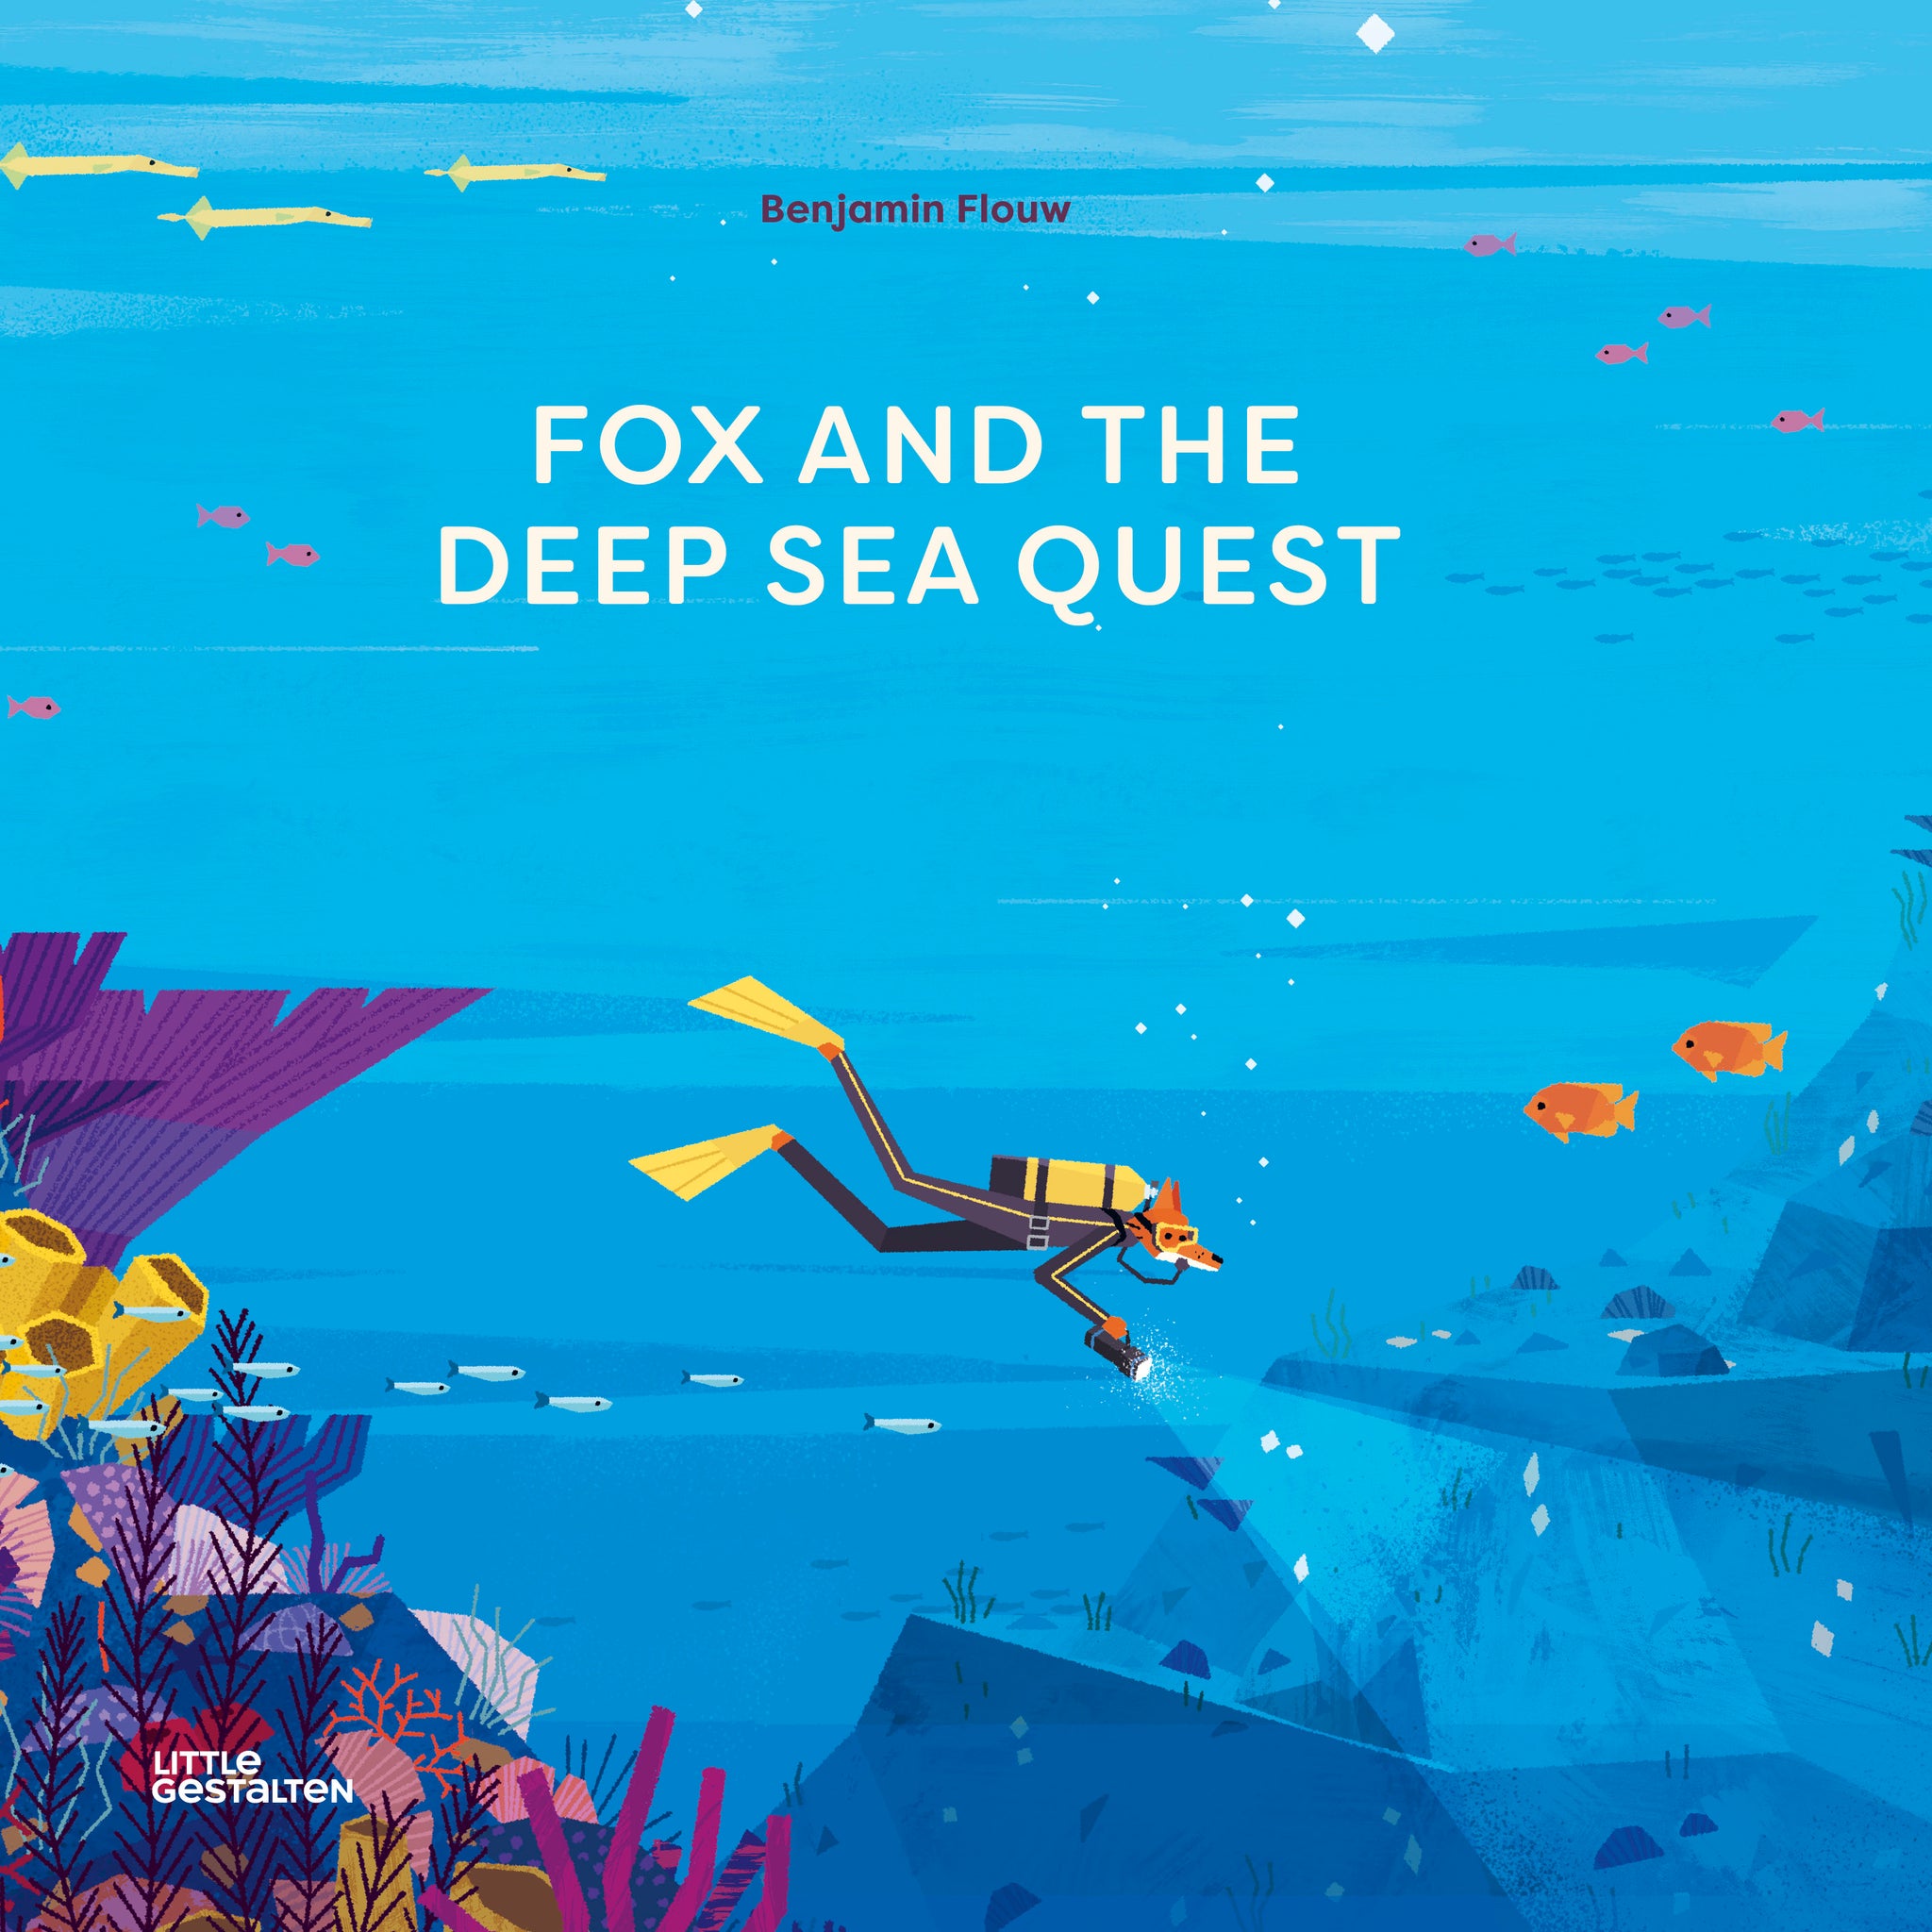 Fox and the Deep Sea Quest